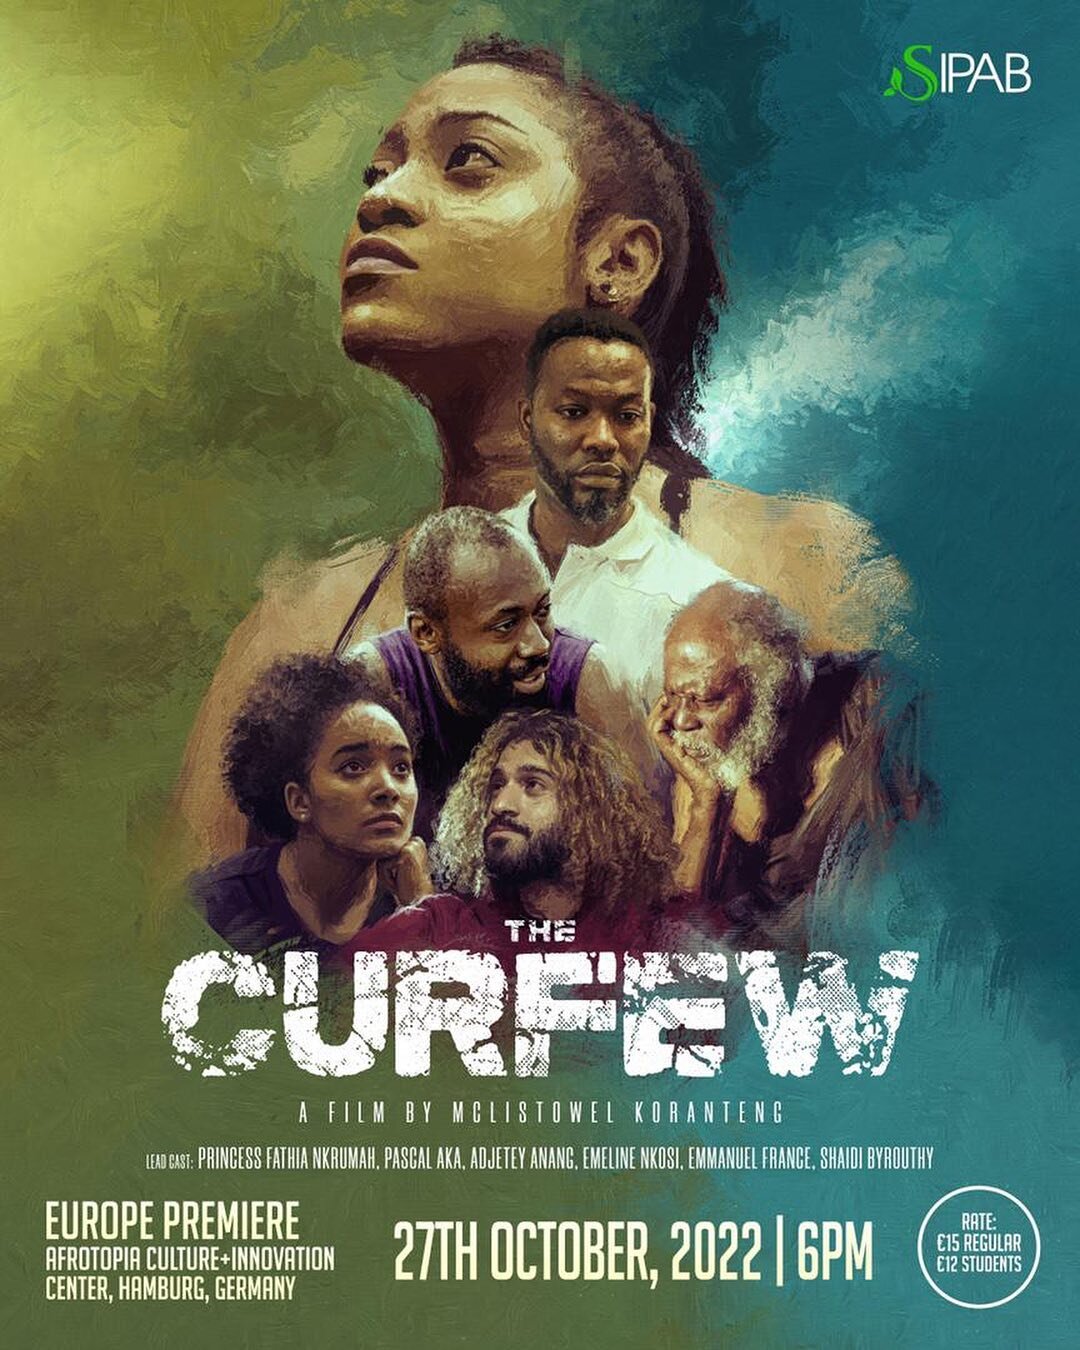 Hello everyone,

*The Curfew comes to Europe*
Excited to share our film The Curfew movie will be screening in Europe for the first time during the SIPAB Conference and art exhibition happening at The Afrotopia cultural and innovation center in Hambur